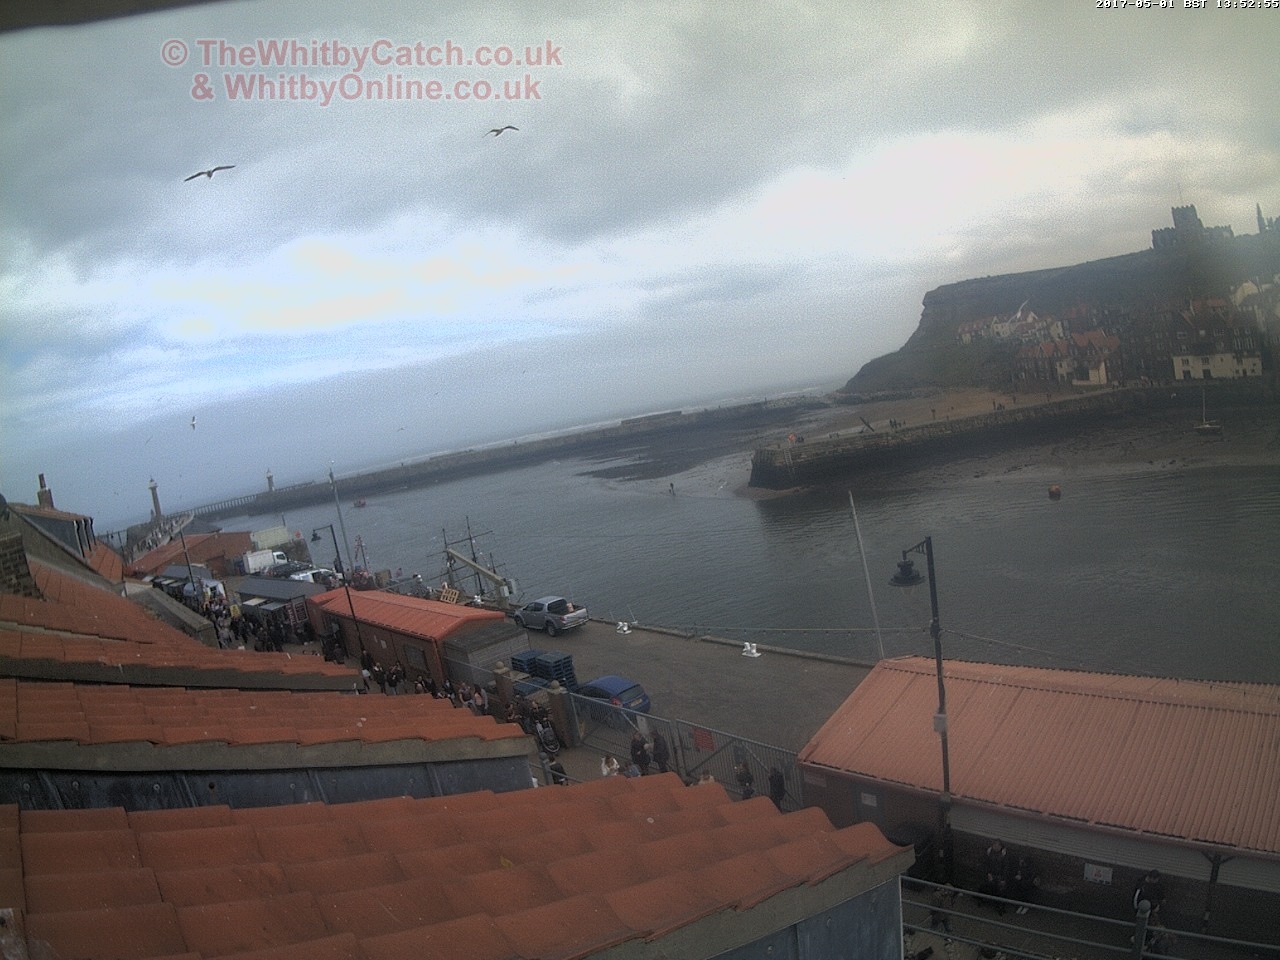 Whitby Mon 1st May 2017 13:53.